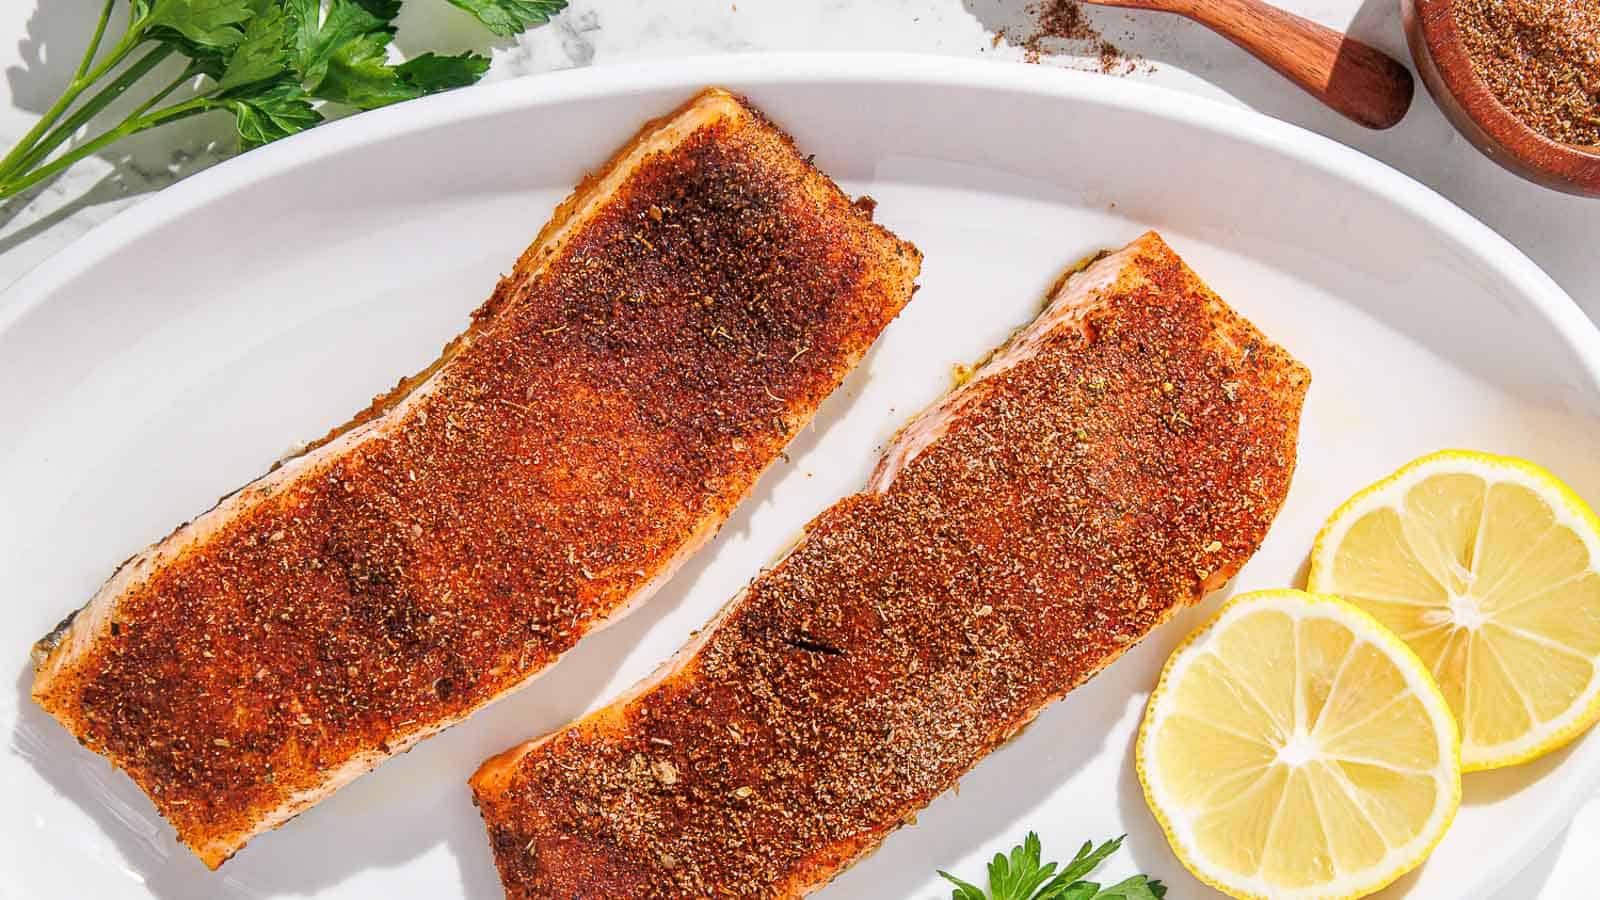 Two blackened salmon fillets on a plate with lemon and parsley.